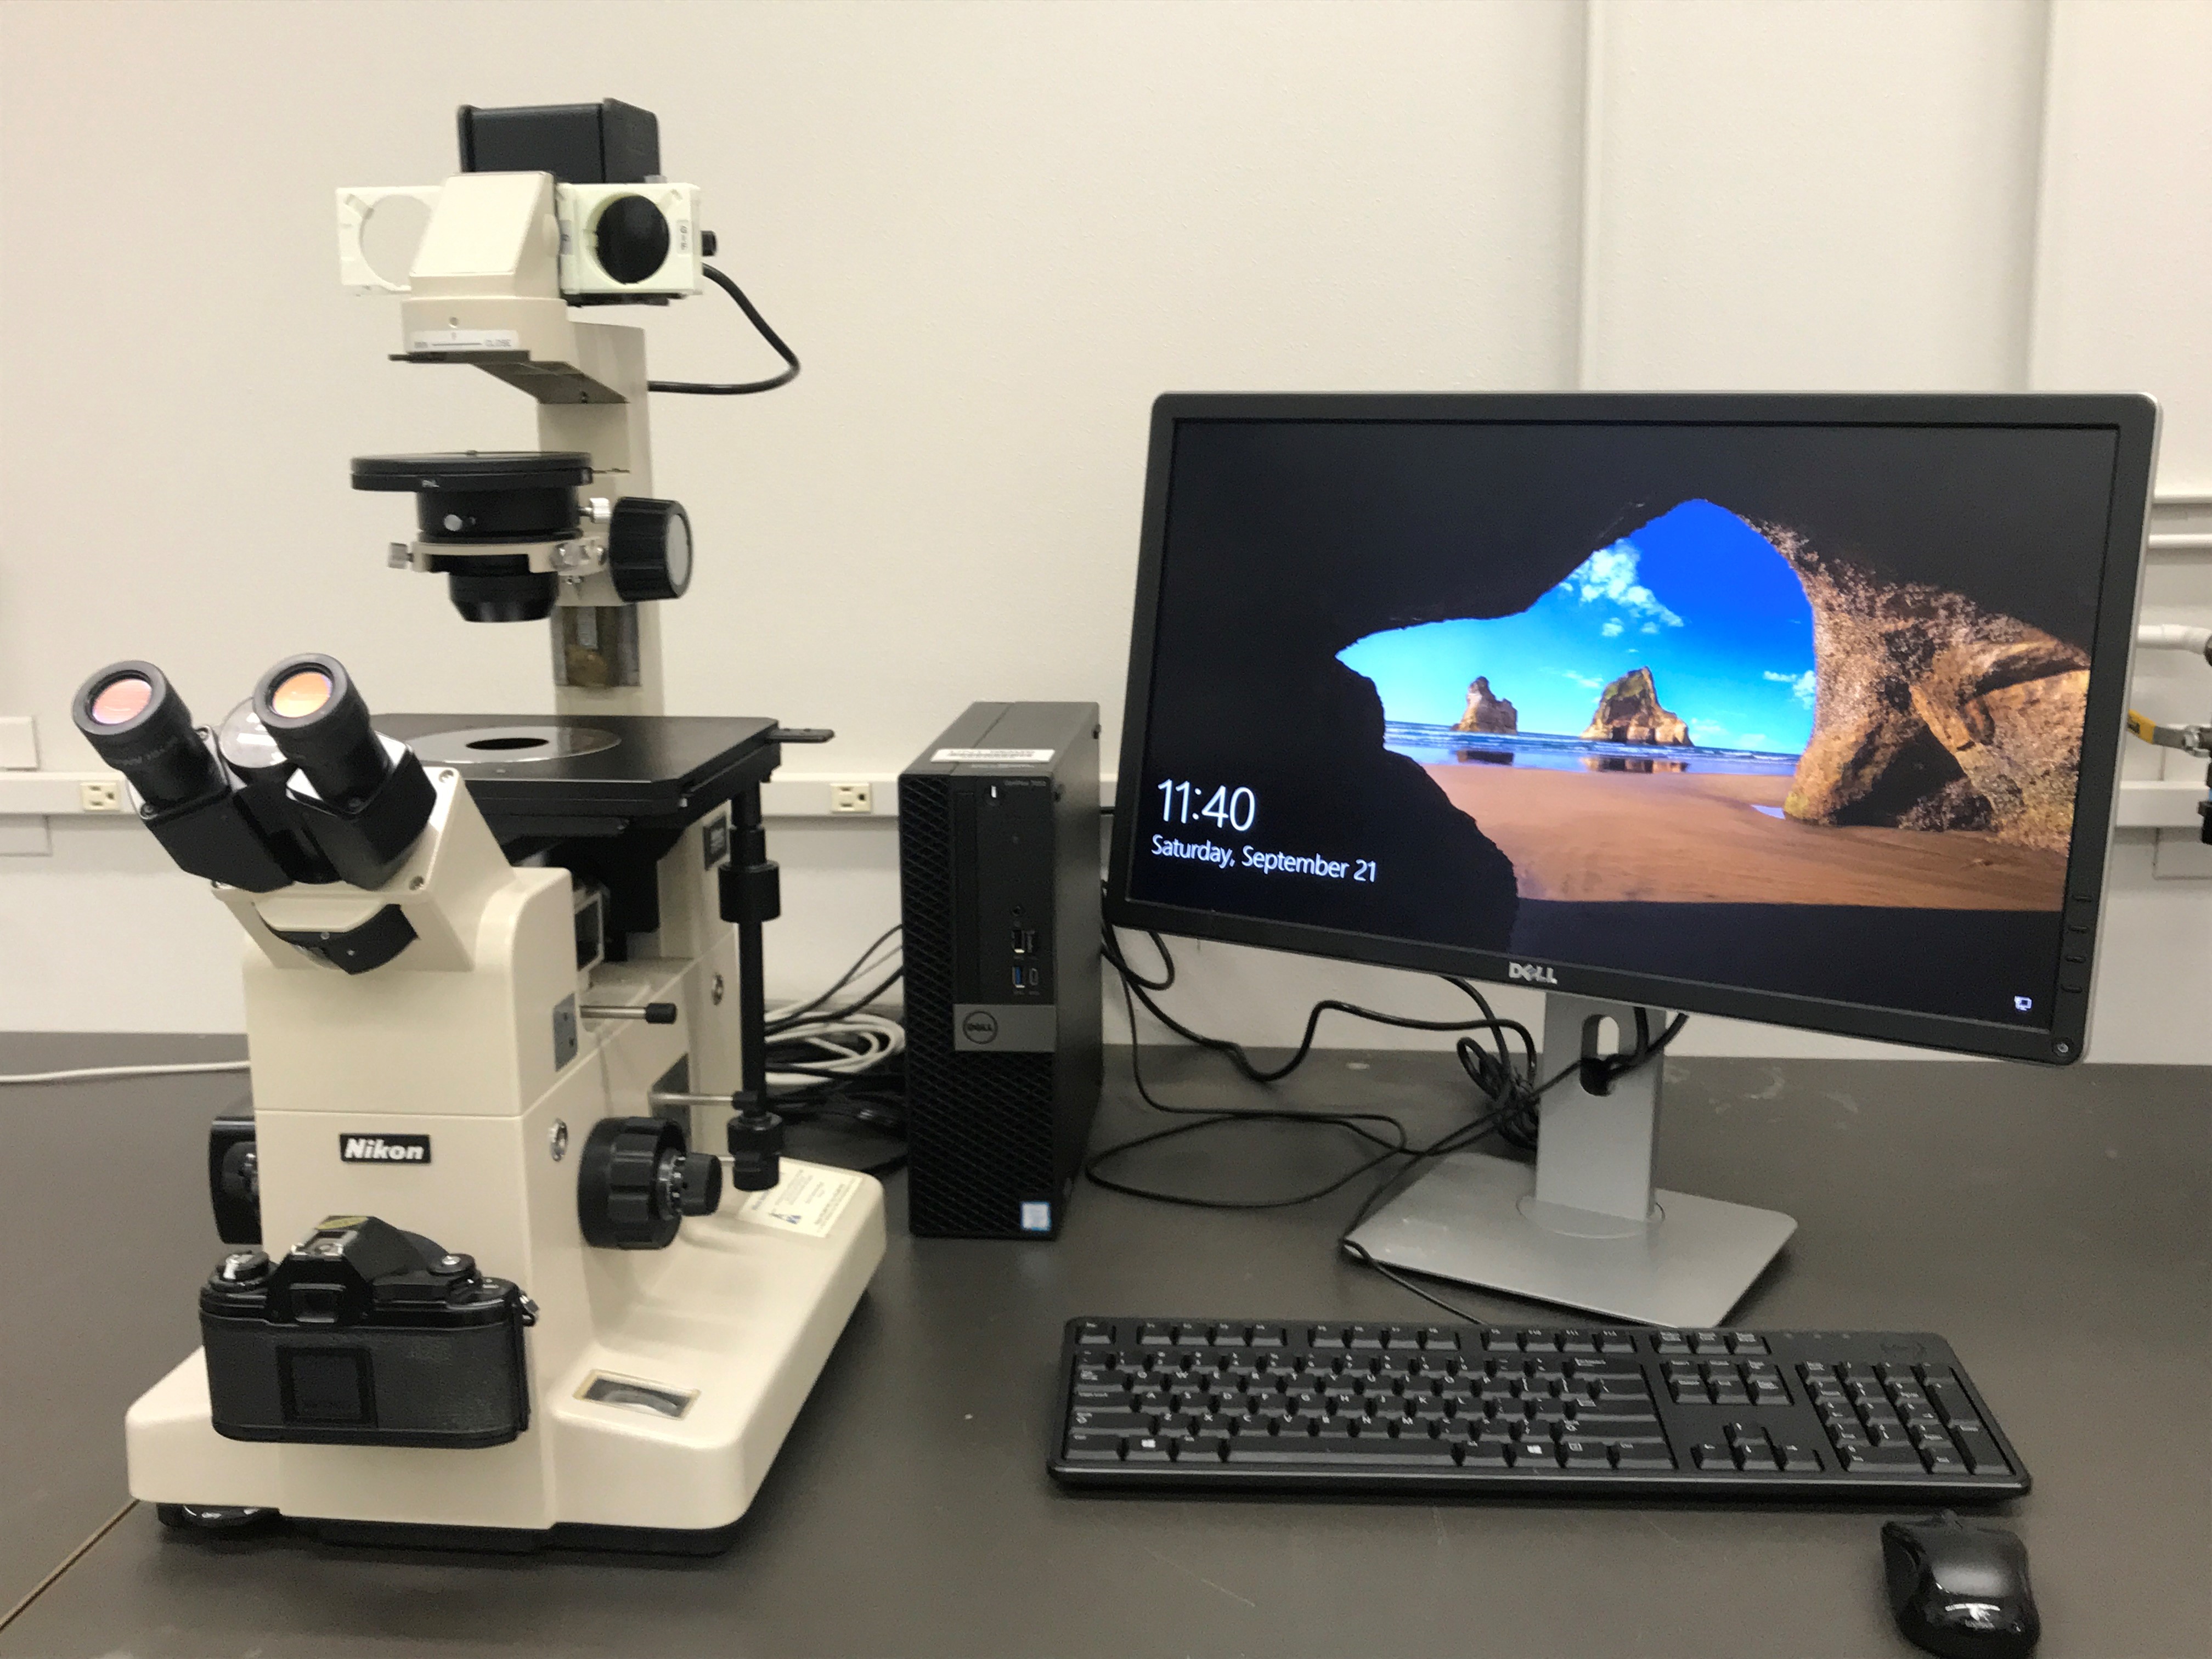 Nikon Inverted Stage Microscope equipped with an AmScope 18MP USB 3.0 High-speed color CMOS camera